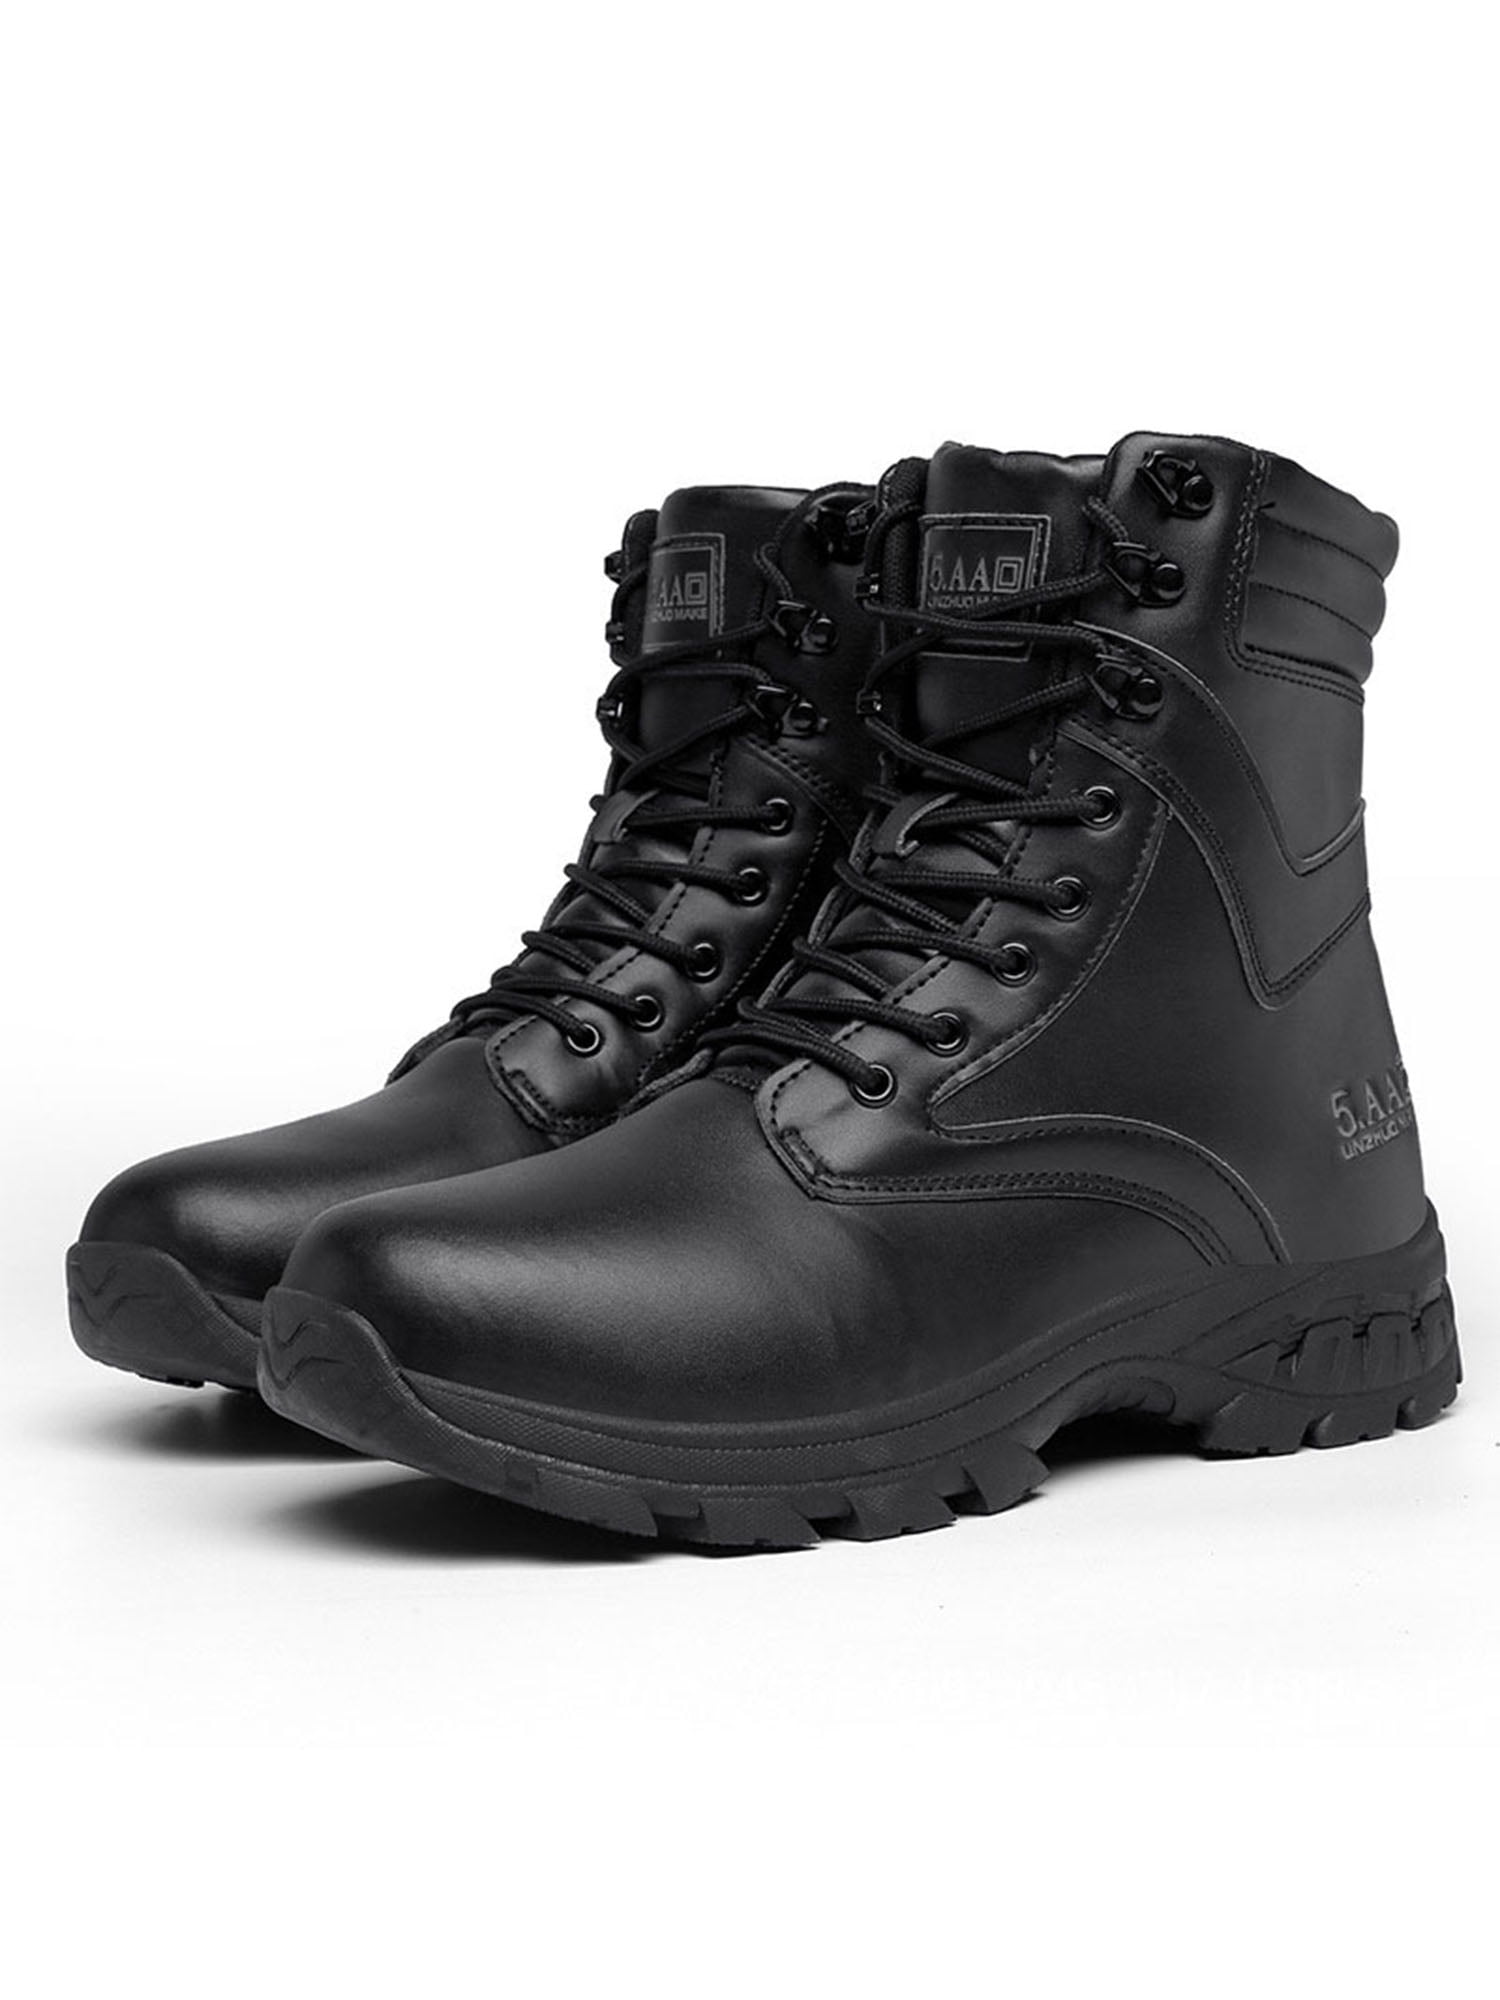 Durable EDC Outdoor Work Boots CQR Mens Military Tactical Boots Water Repellent Lightweight Mid-Ankle Combat Boots 